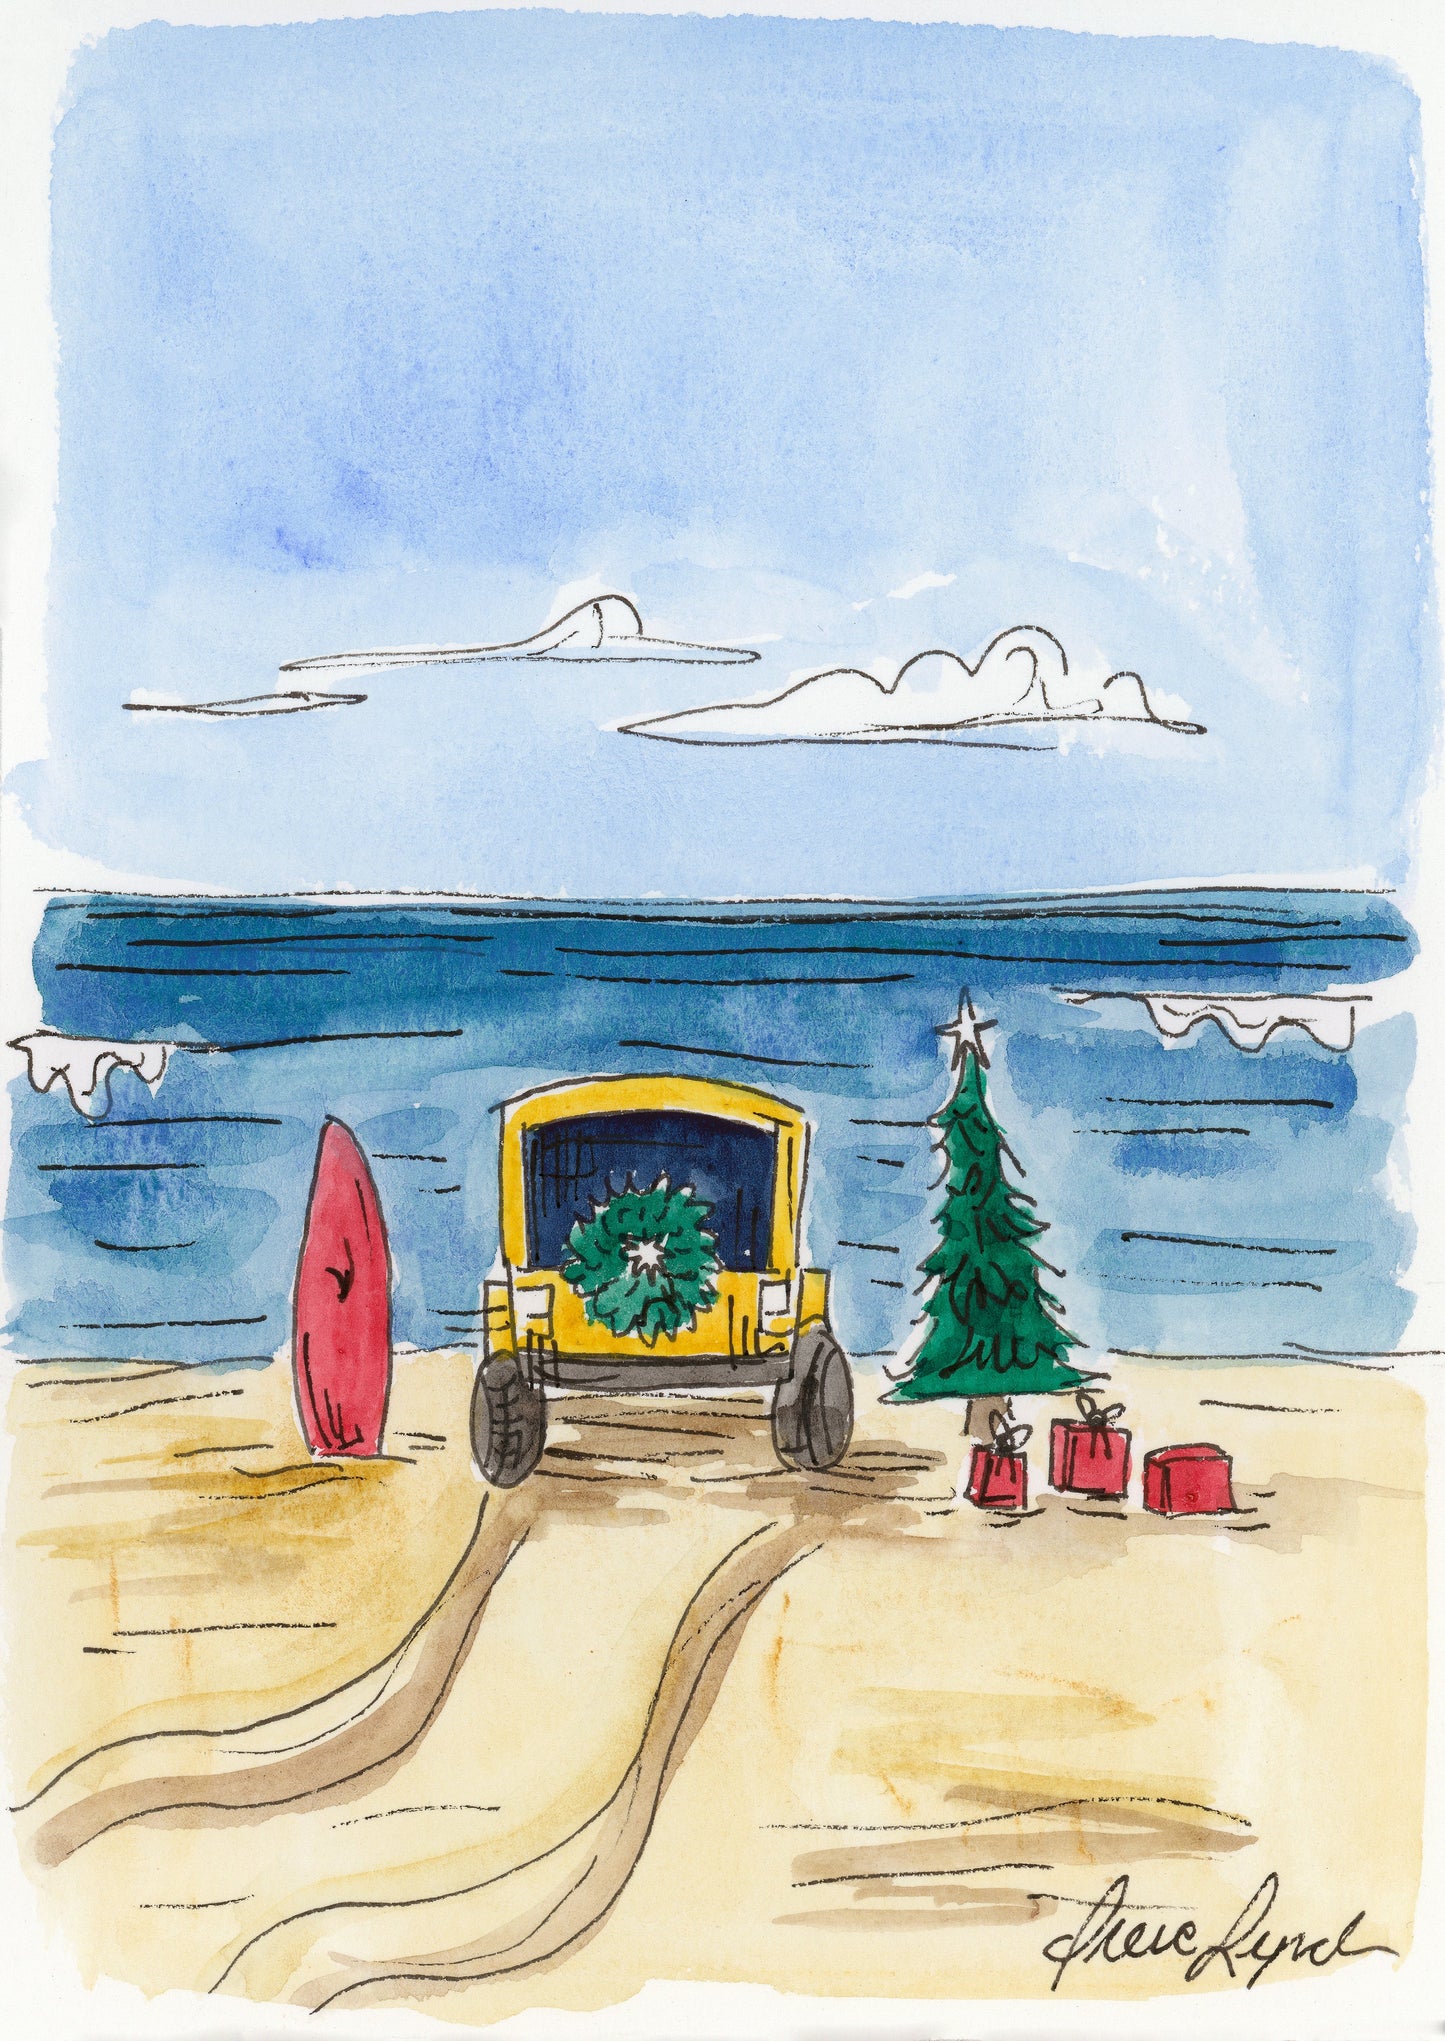 **New 2023 Collection** "A Cape Cod Holiday" Holiday Card Box Set